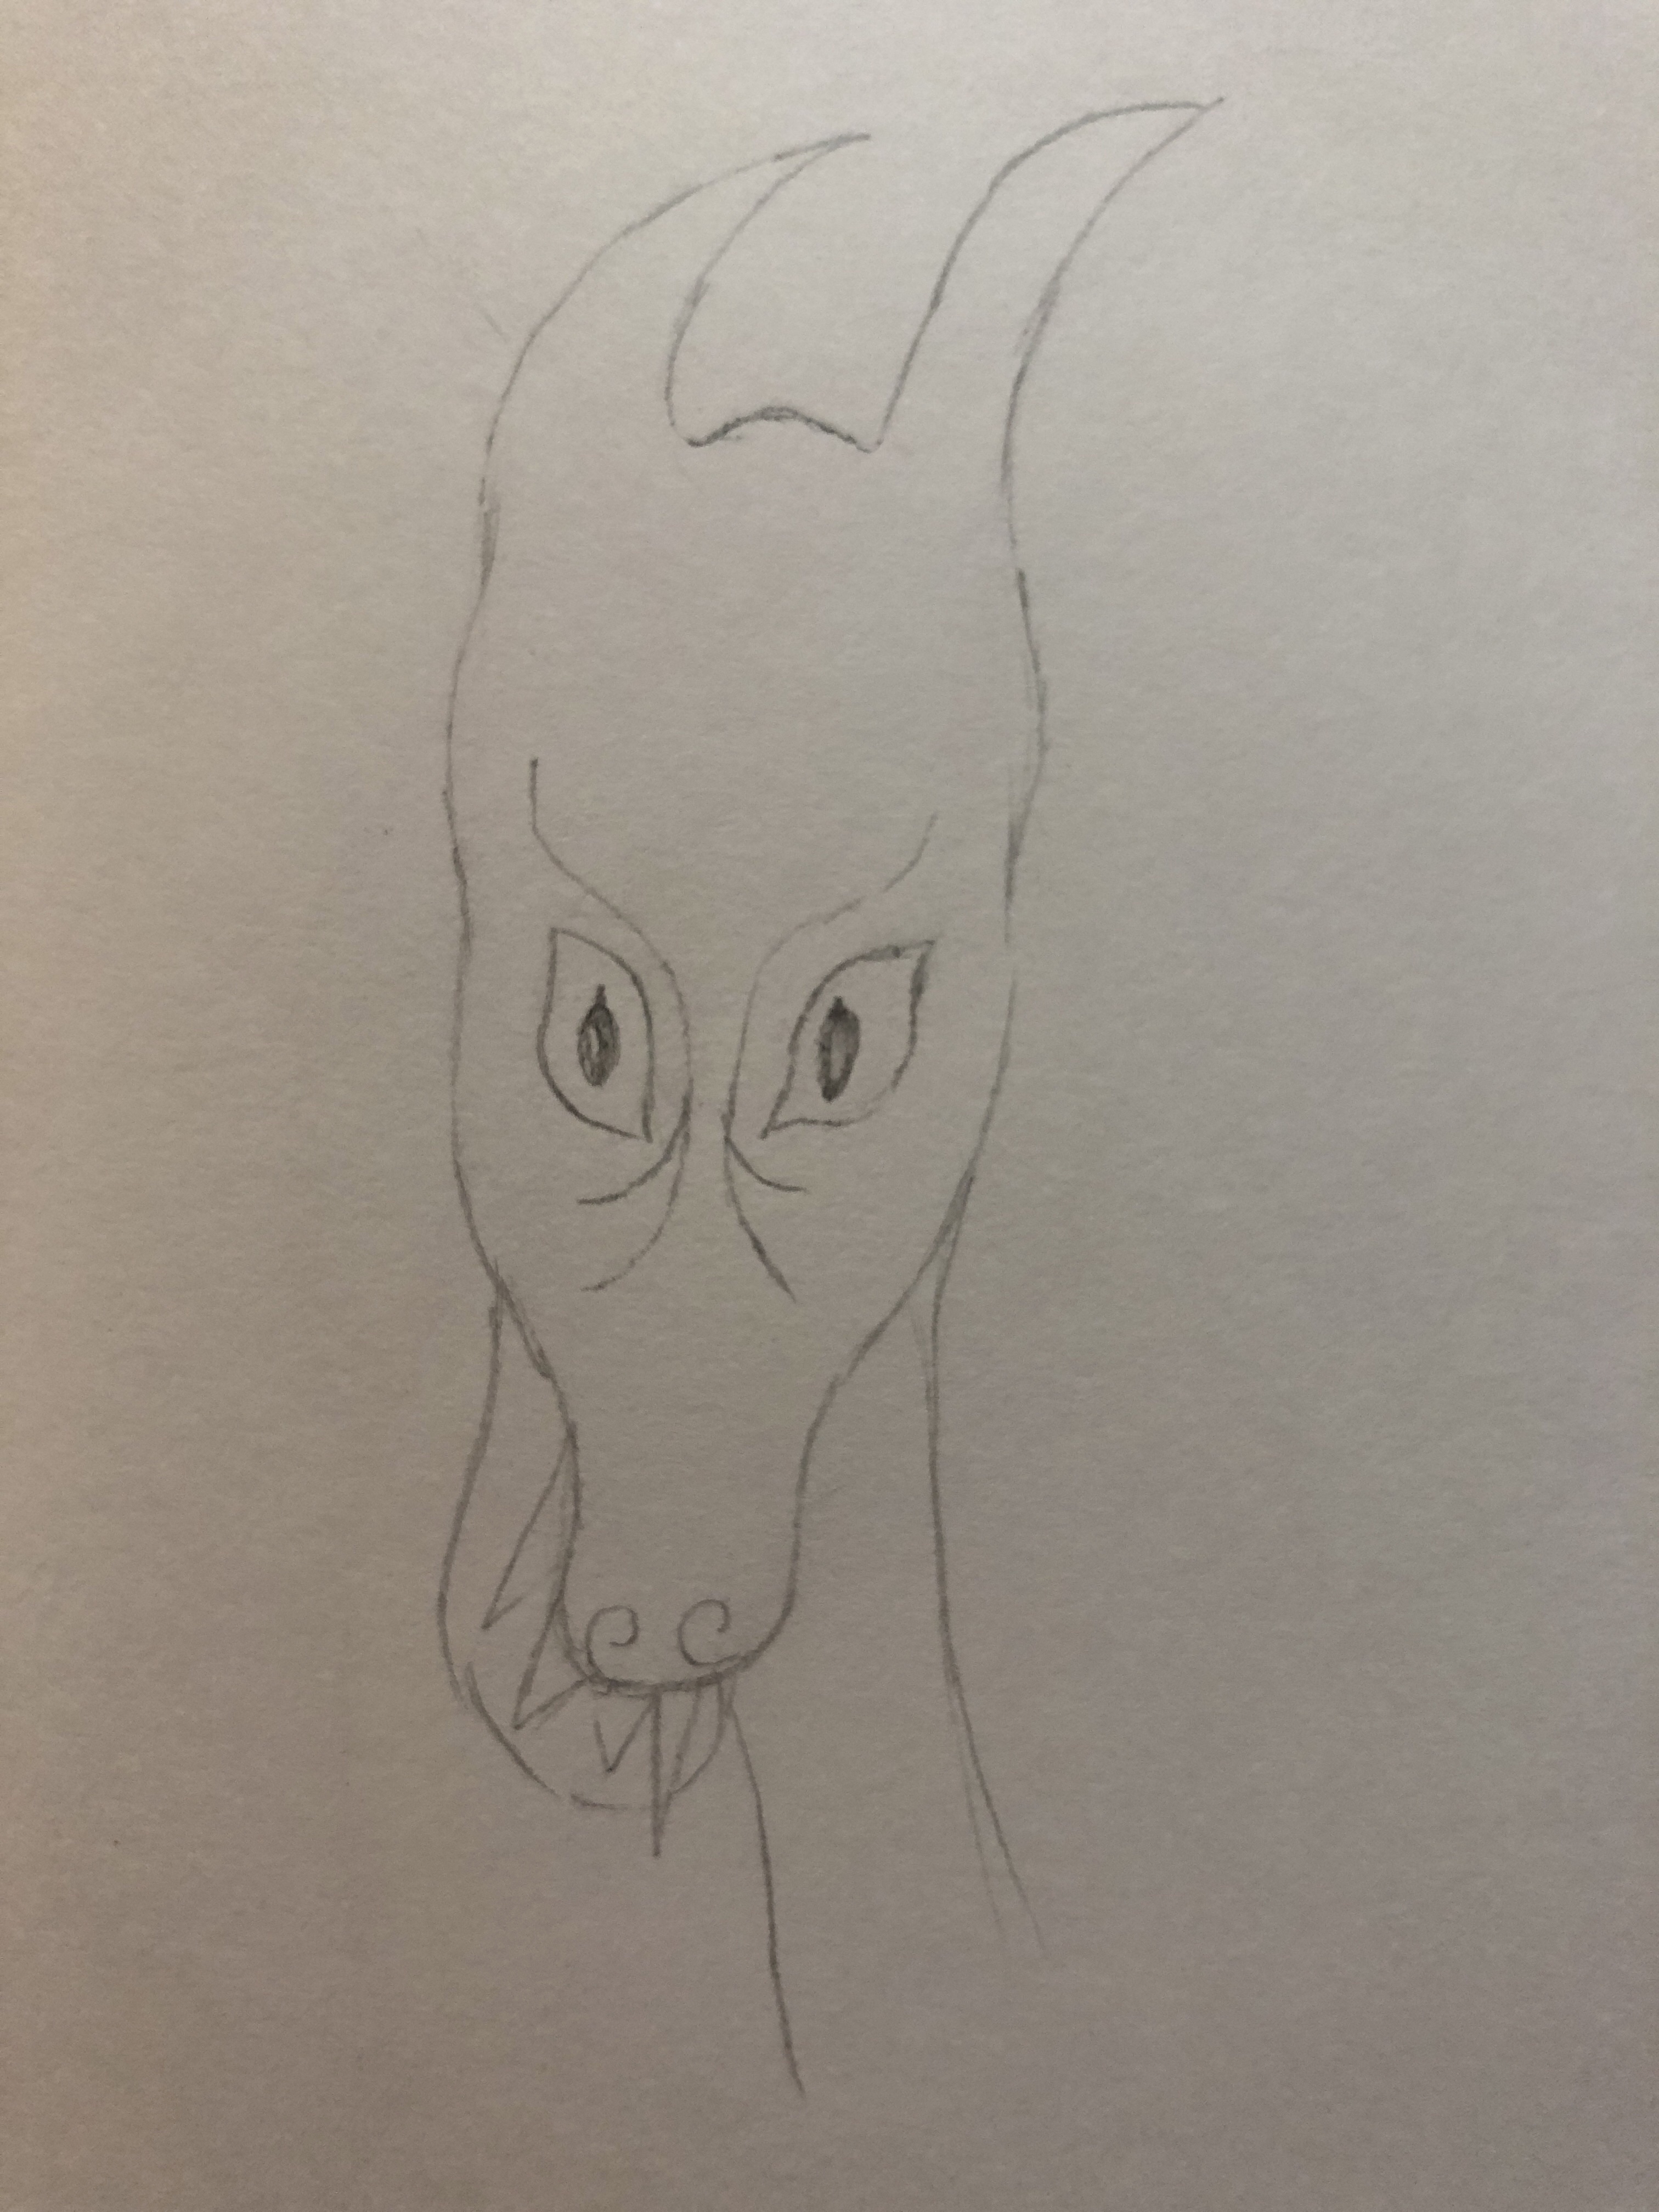 Dragon in pencil with jaw askew just head